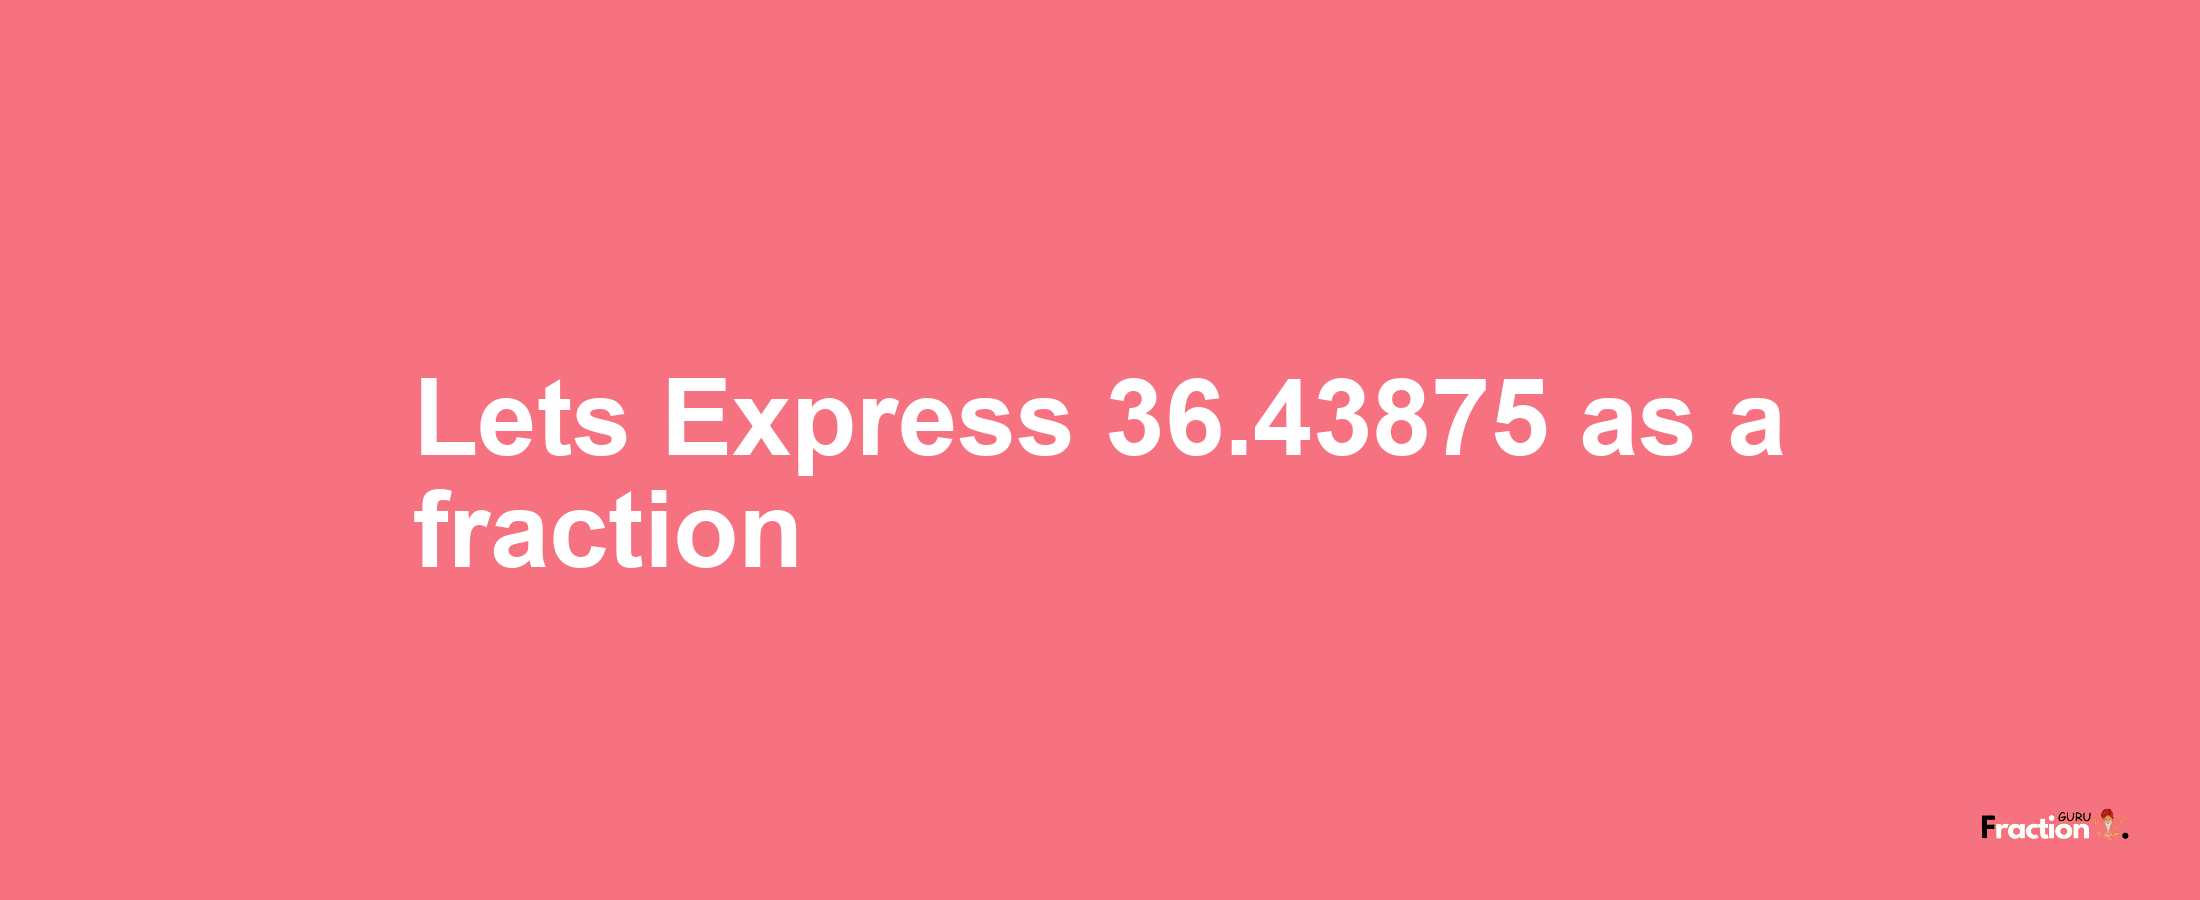 Lets Express 36.43875 as afraction